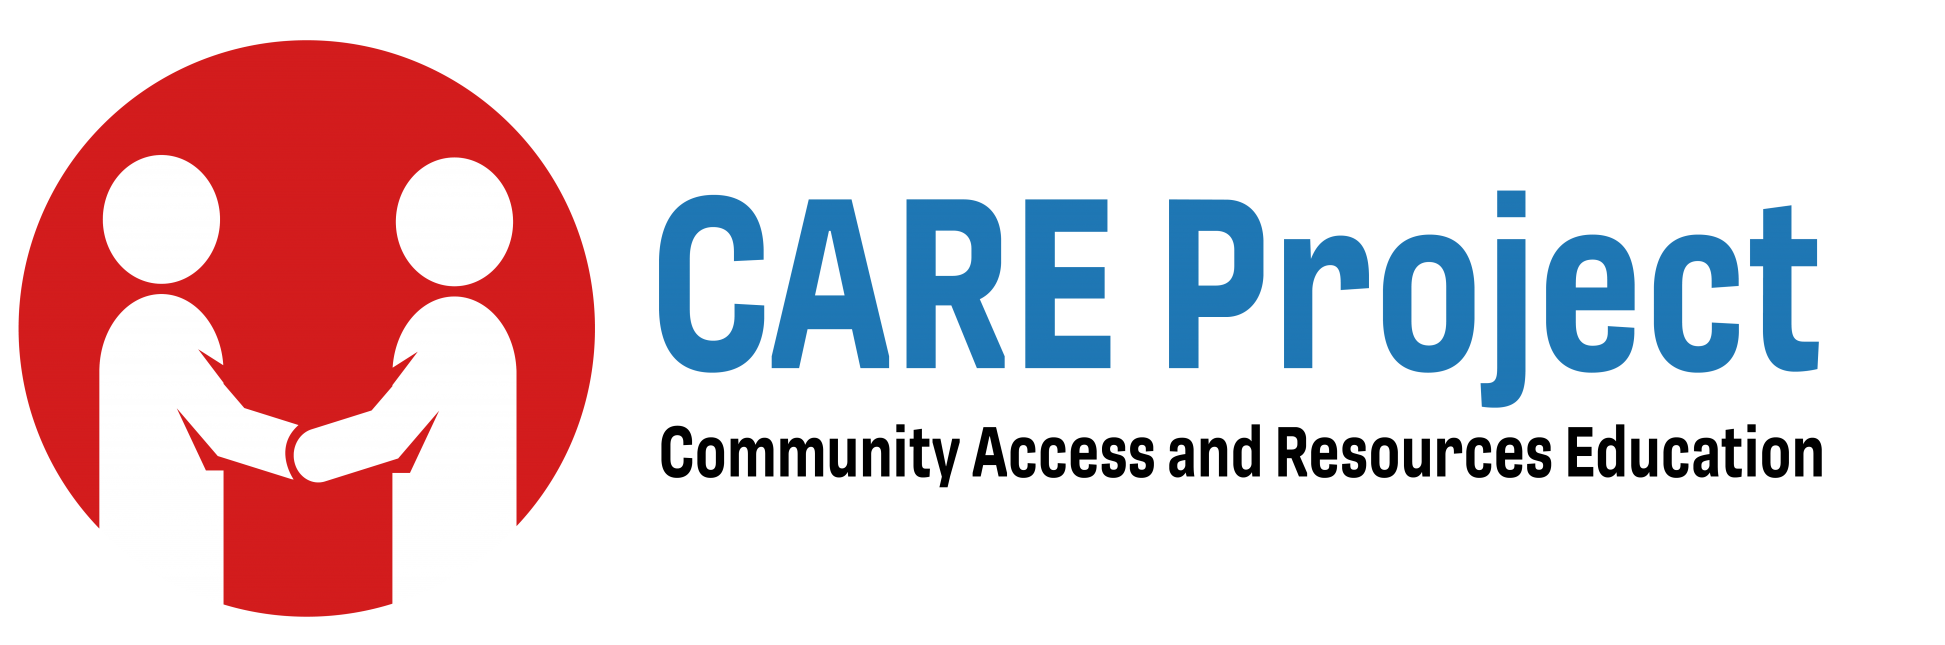 CARE Project – Behavioral Health Solutions of South Texas